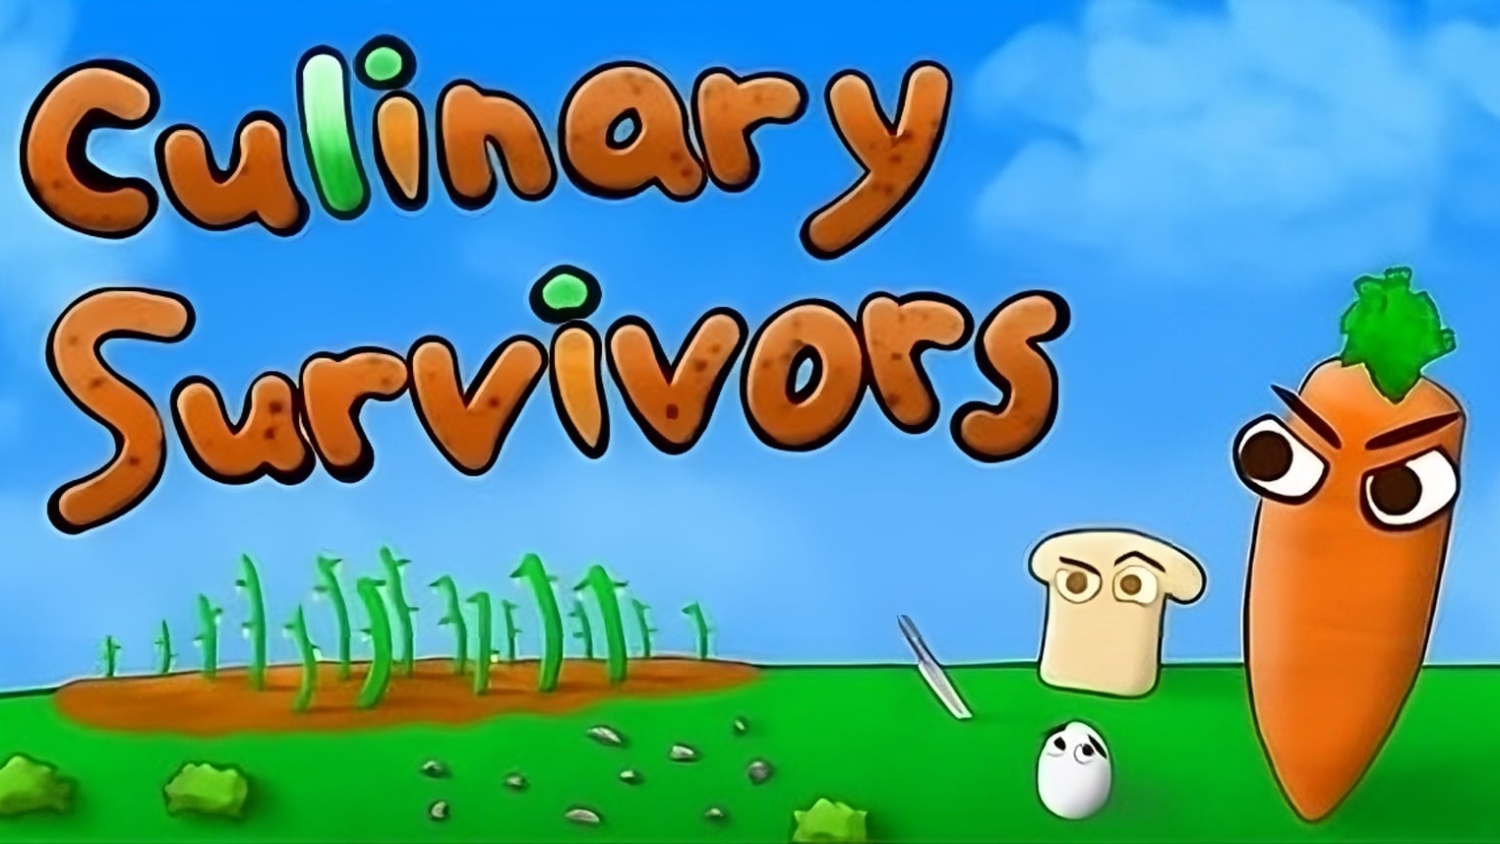 Is Culinary Survivors, Worth Playing?